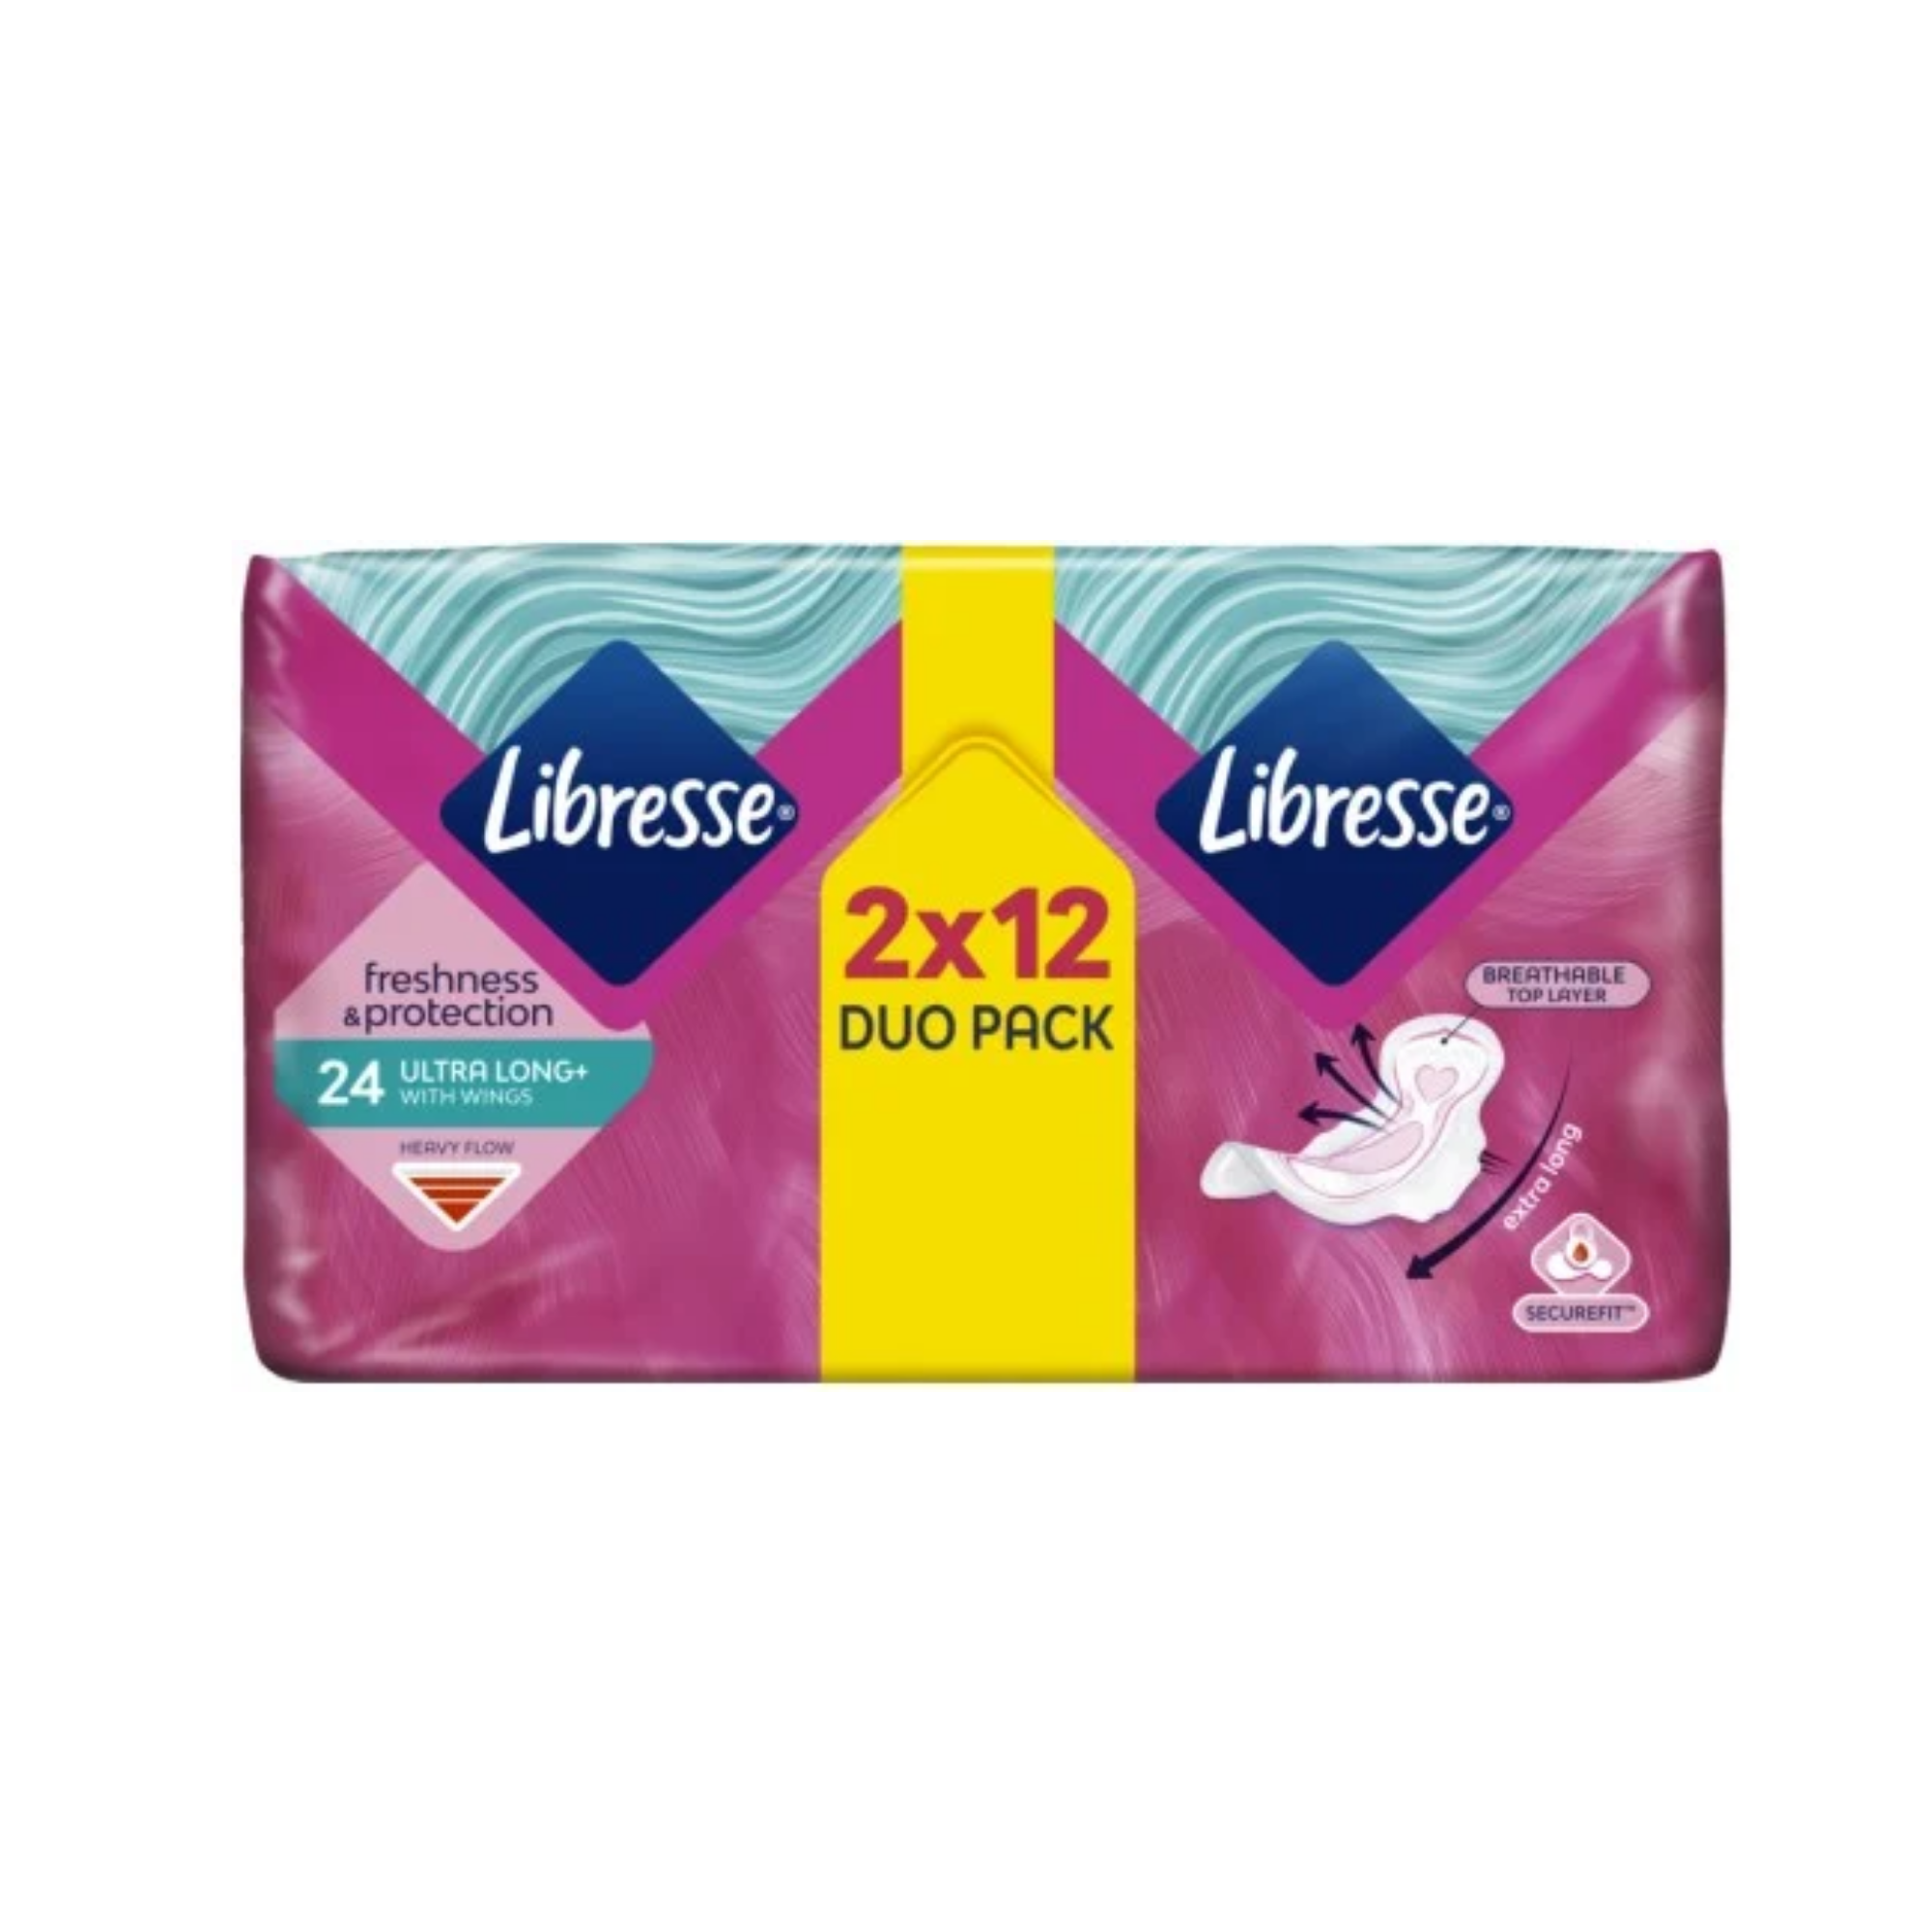 Libresse Ultra Thin Long Wing duopack 24 st